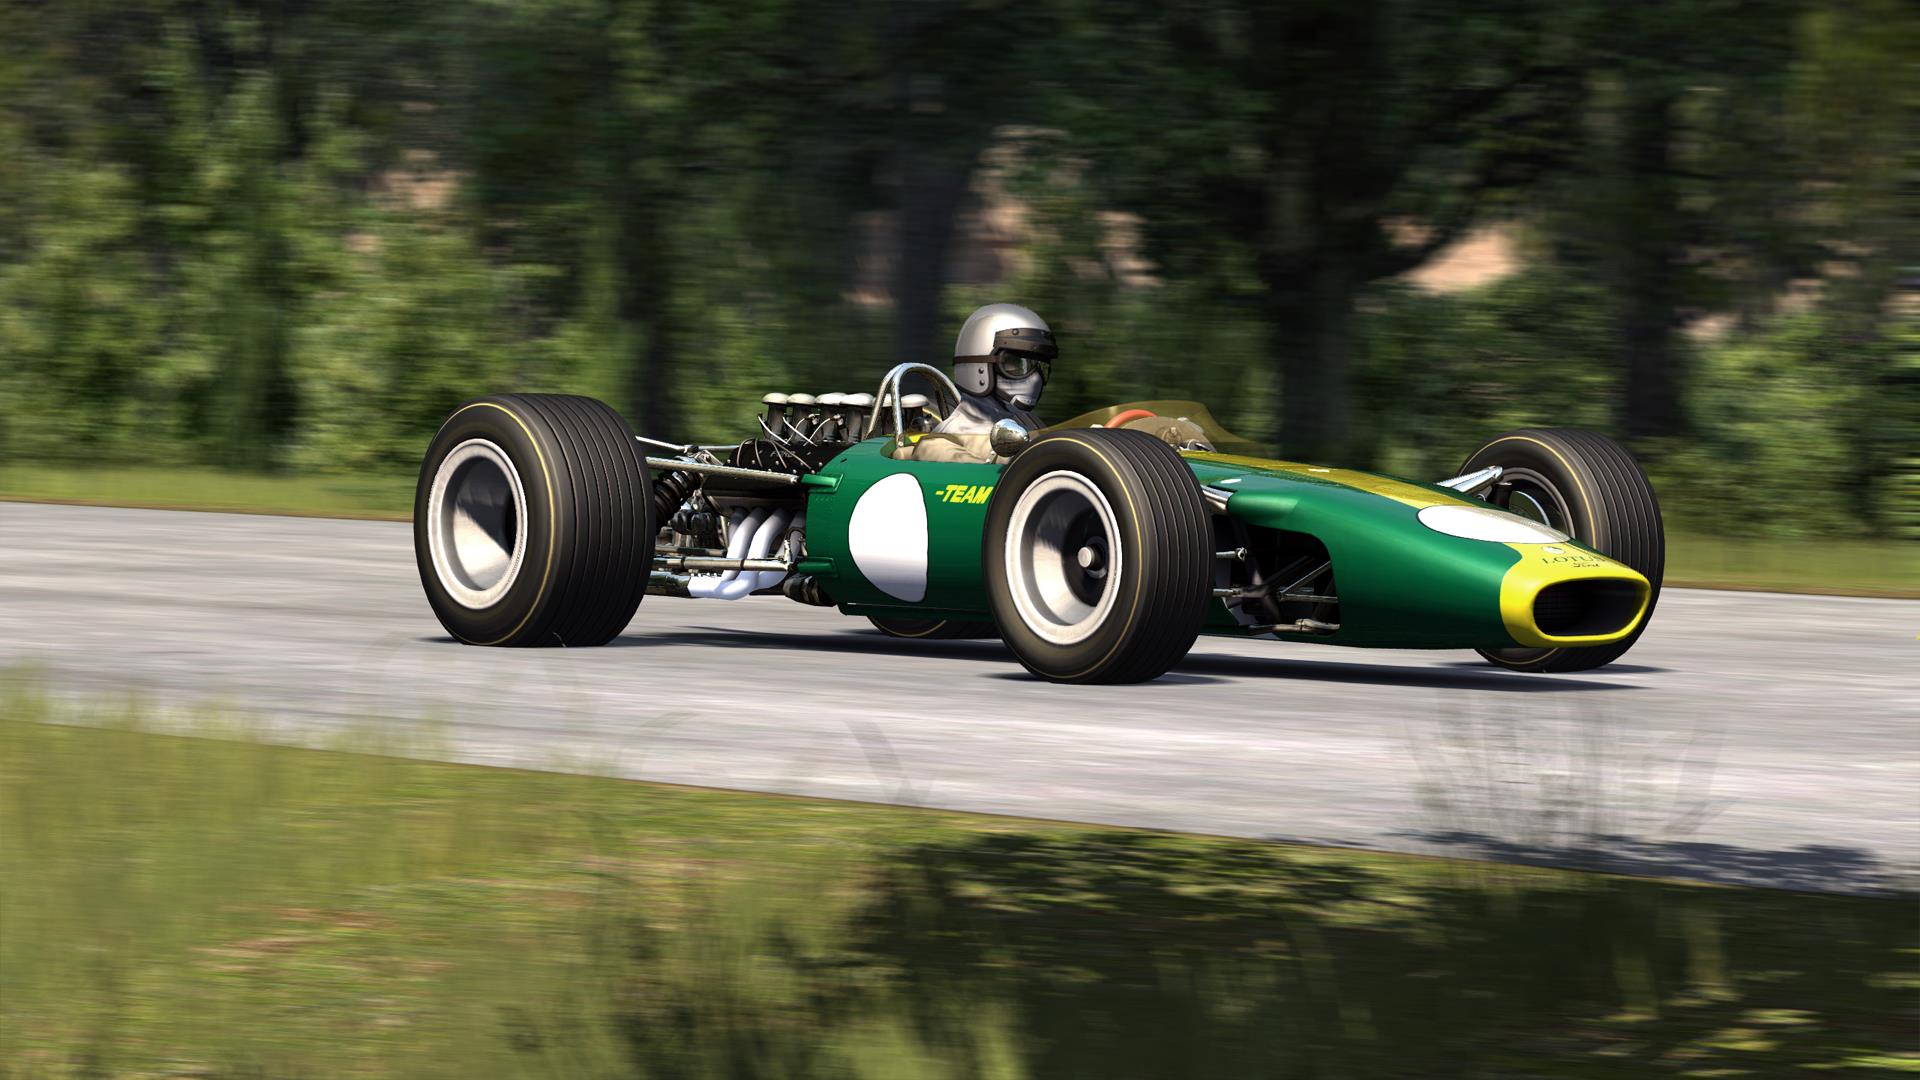 Video Game Assetto Corsa HD Wallpaper | Background Image